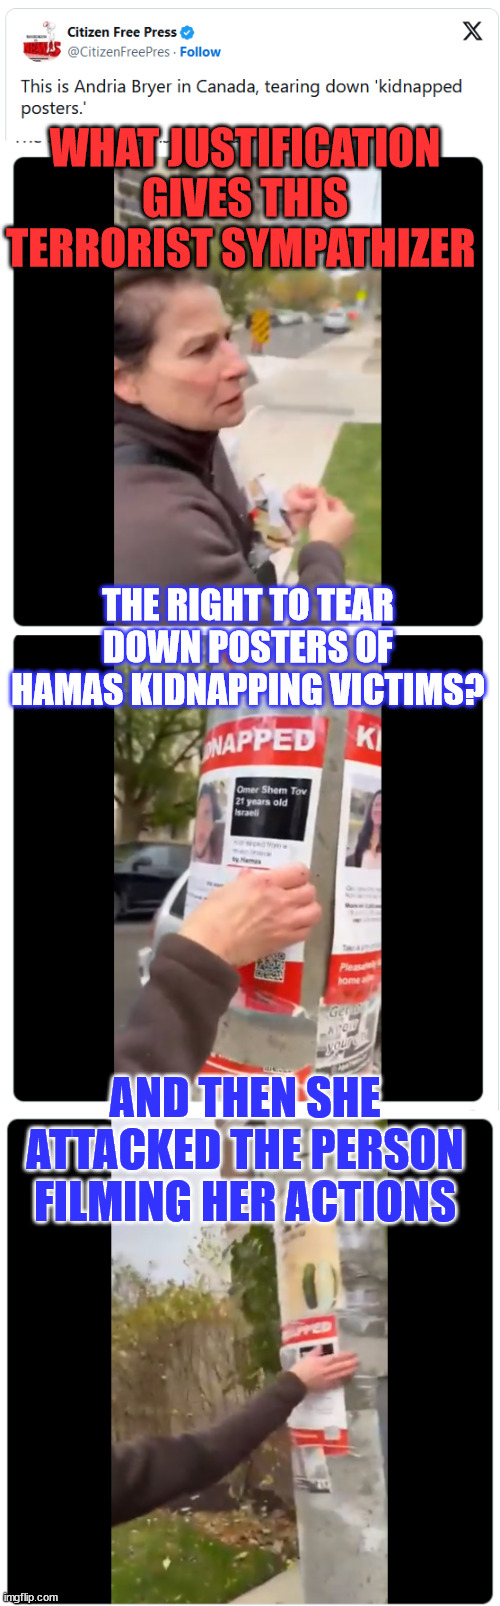 Terrorist sympathizers are still terrorists. | WHAT JUSTIFICATION GIVES THIS TERRORIST SYMPATHIZER; THE RIGHT TO TEAR DOWN POSTERS OF HAMAS KIDNAPPING VICTIMS? AND THEN SHE ATTACKED THE PERSON FILMING HER ACTIONS | image tagged in triggered liberal,terrorist,sympathy,violent,liberals | made w/ Imgflip meme maker